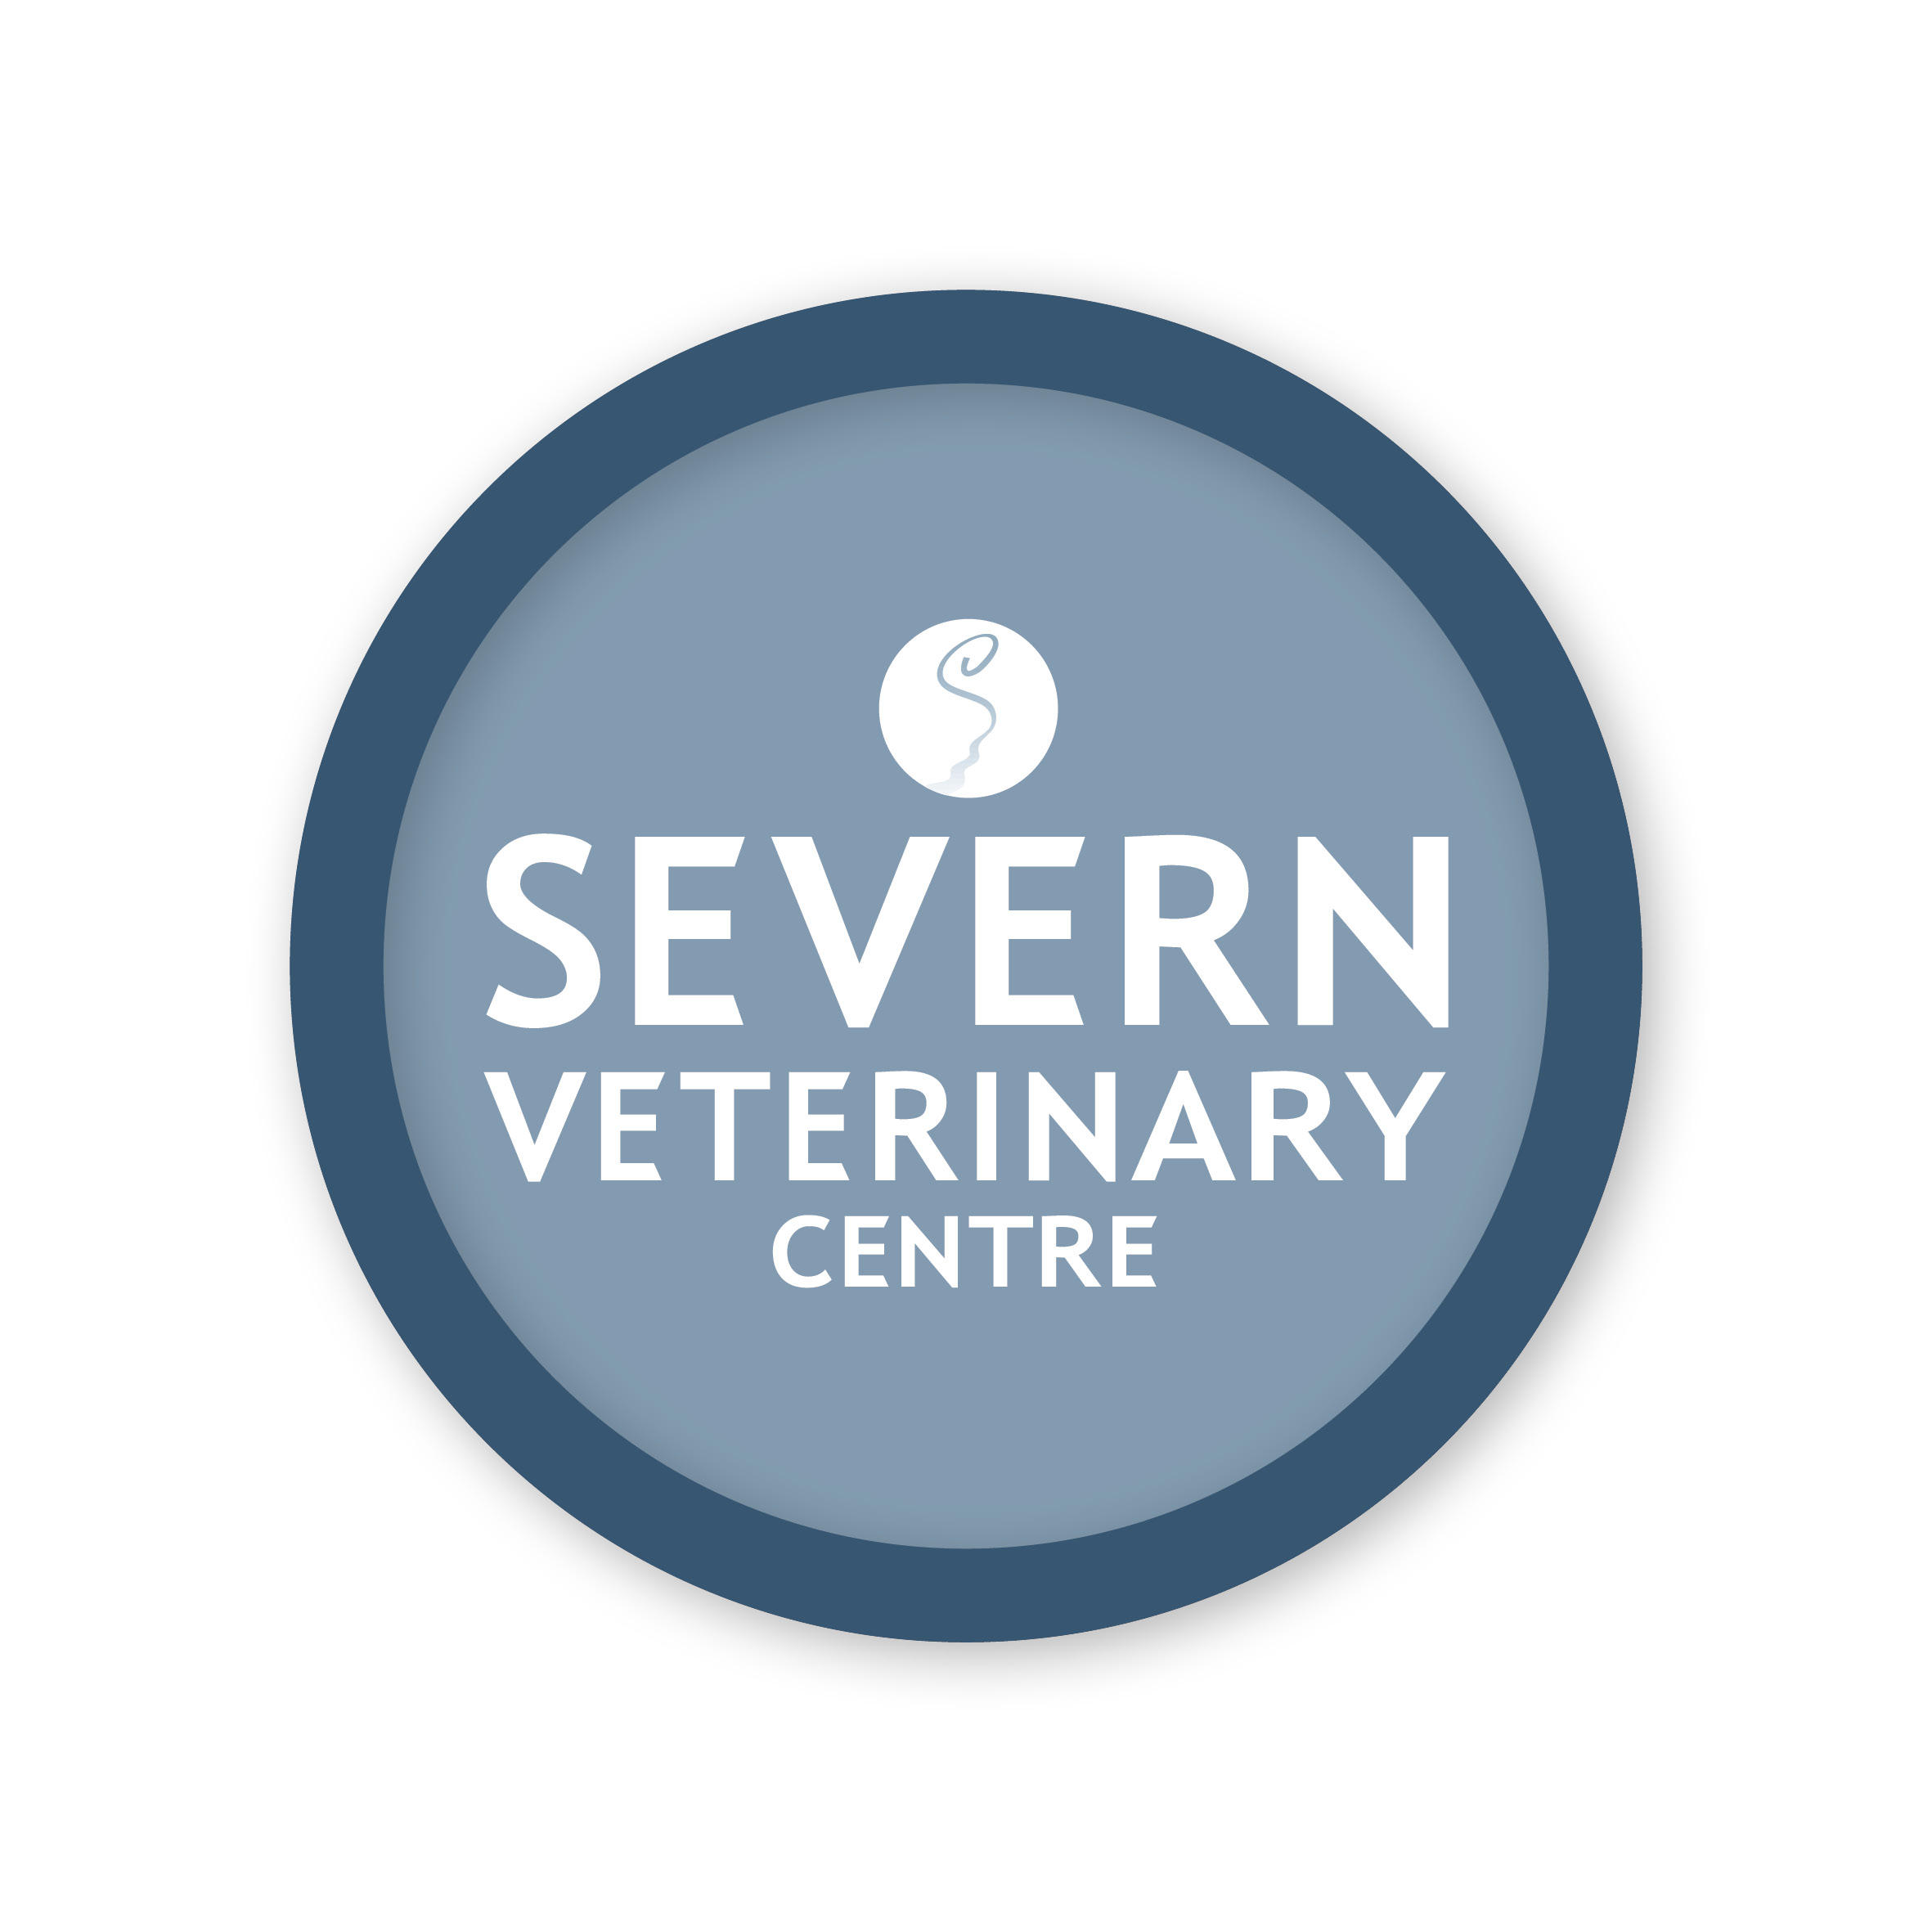 Severn Veterinary Centre, Tybridge House - Worcester, Worcestershire WR2 5BA - 01905 421296 | ShowMeLocal.com